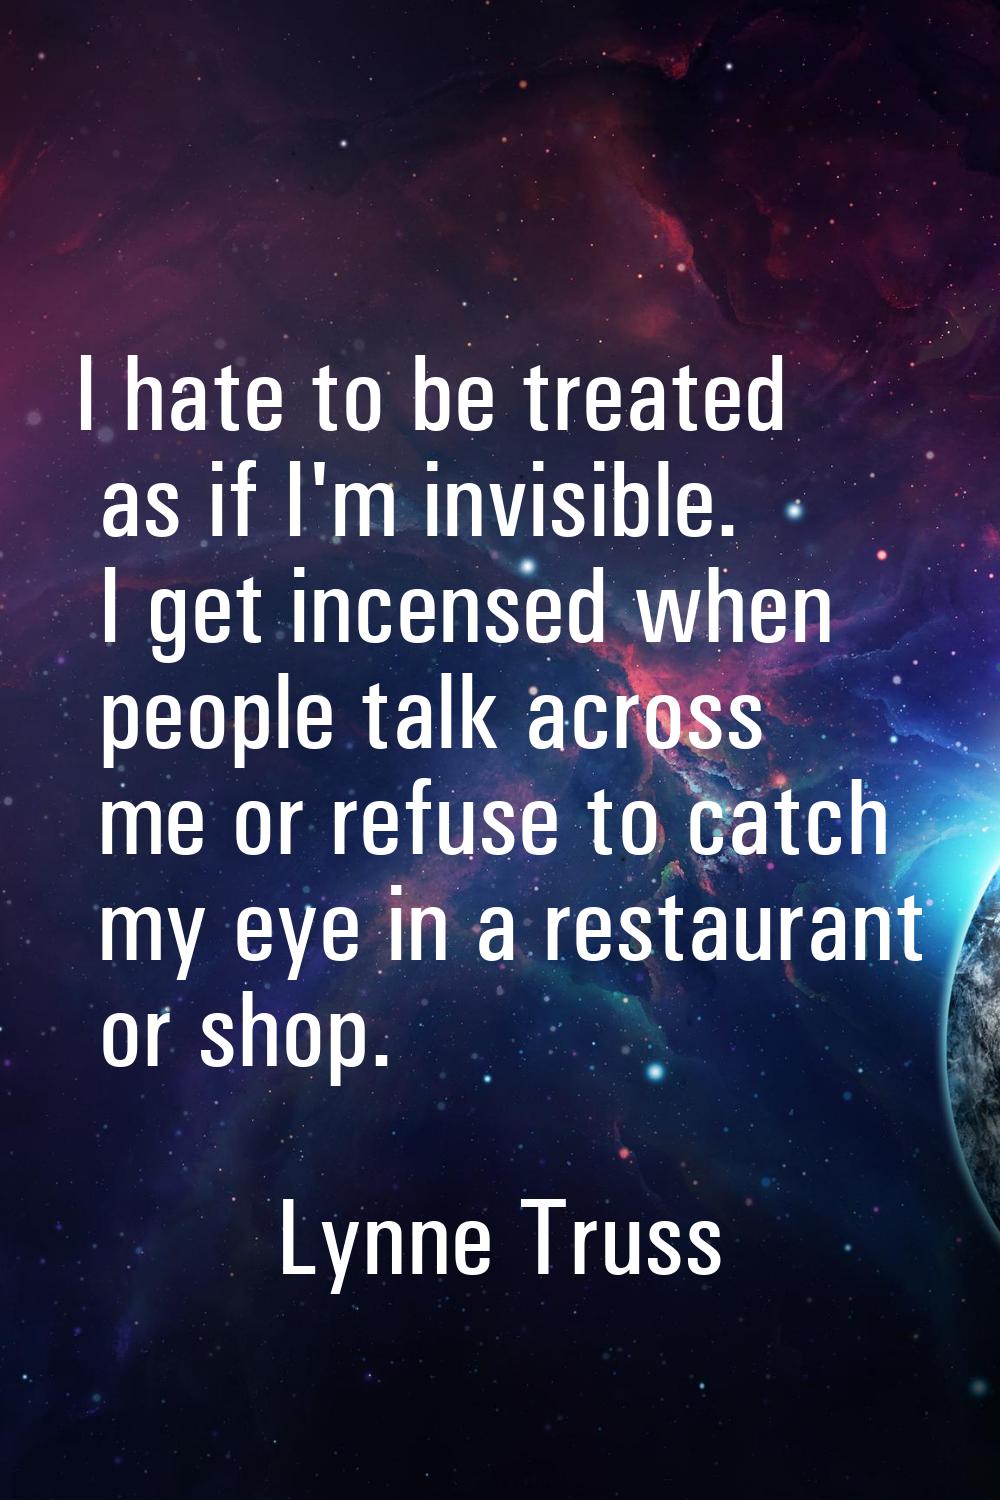 I hate to be treated as if I'm invisible. I get incensed when people talk across me or refuse to ca